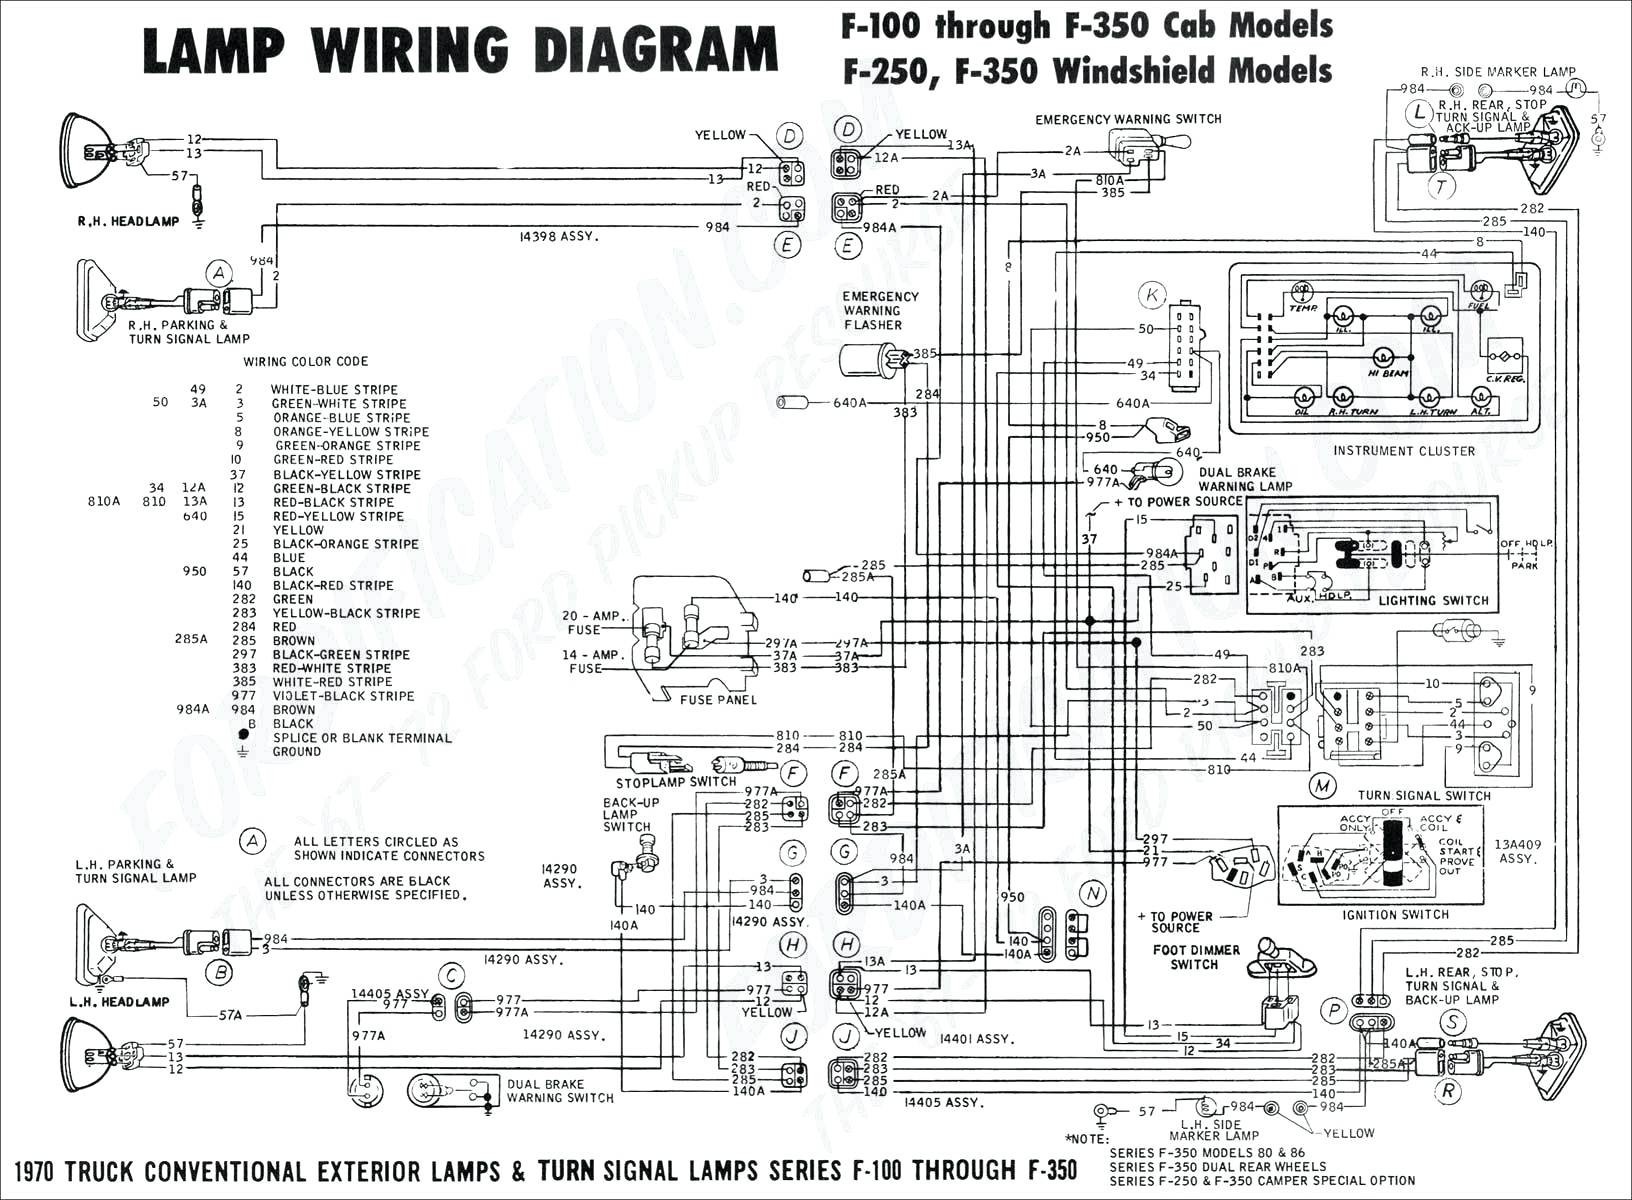 2014 Jeep Wrangler Stereo Wiring Diagram Simplified Shapes 2000 Ford Mustang Stereo Wiring Diagram Autos Weblog Data Wiring